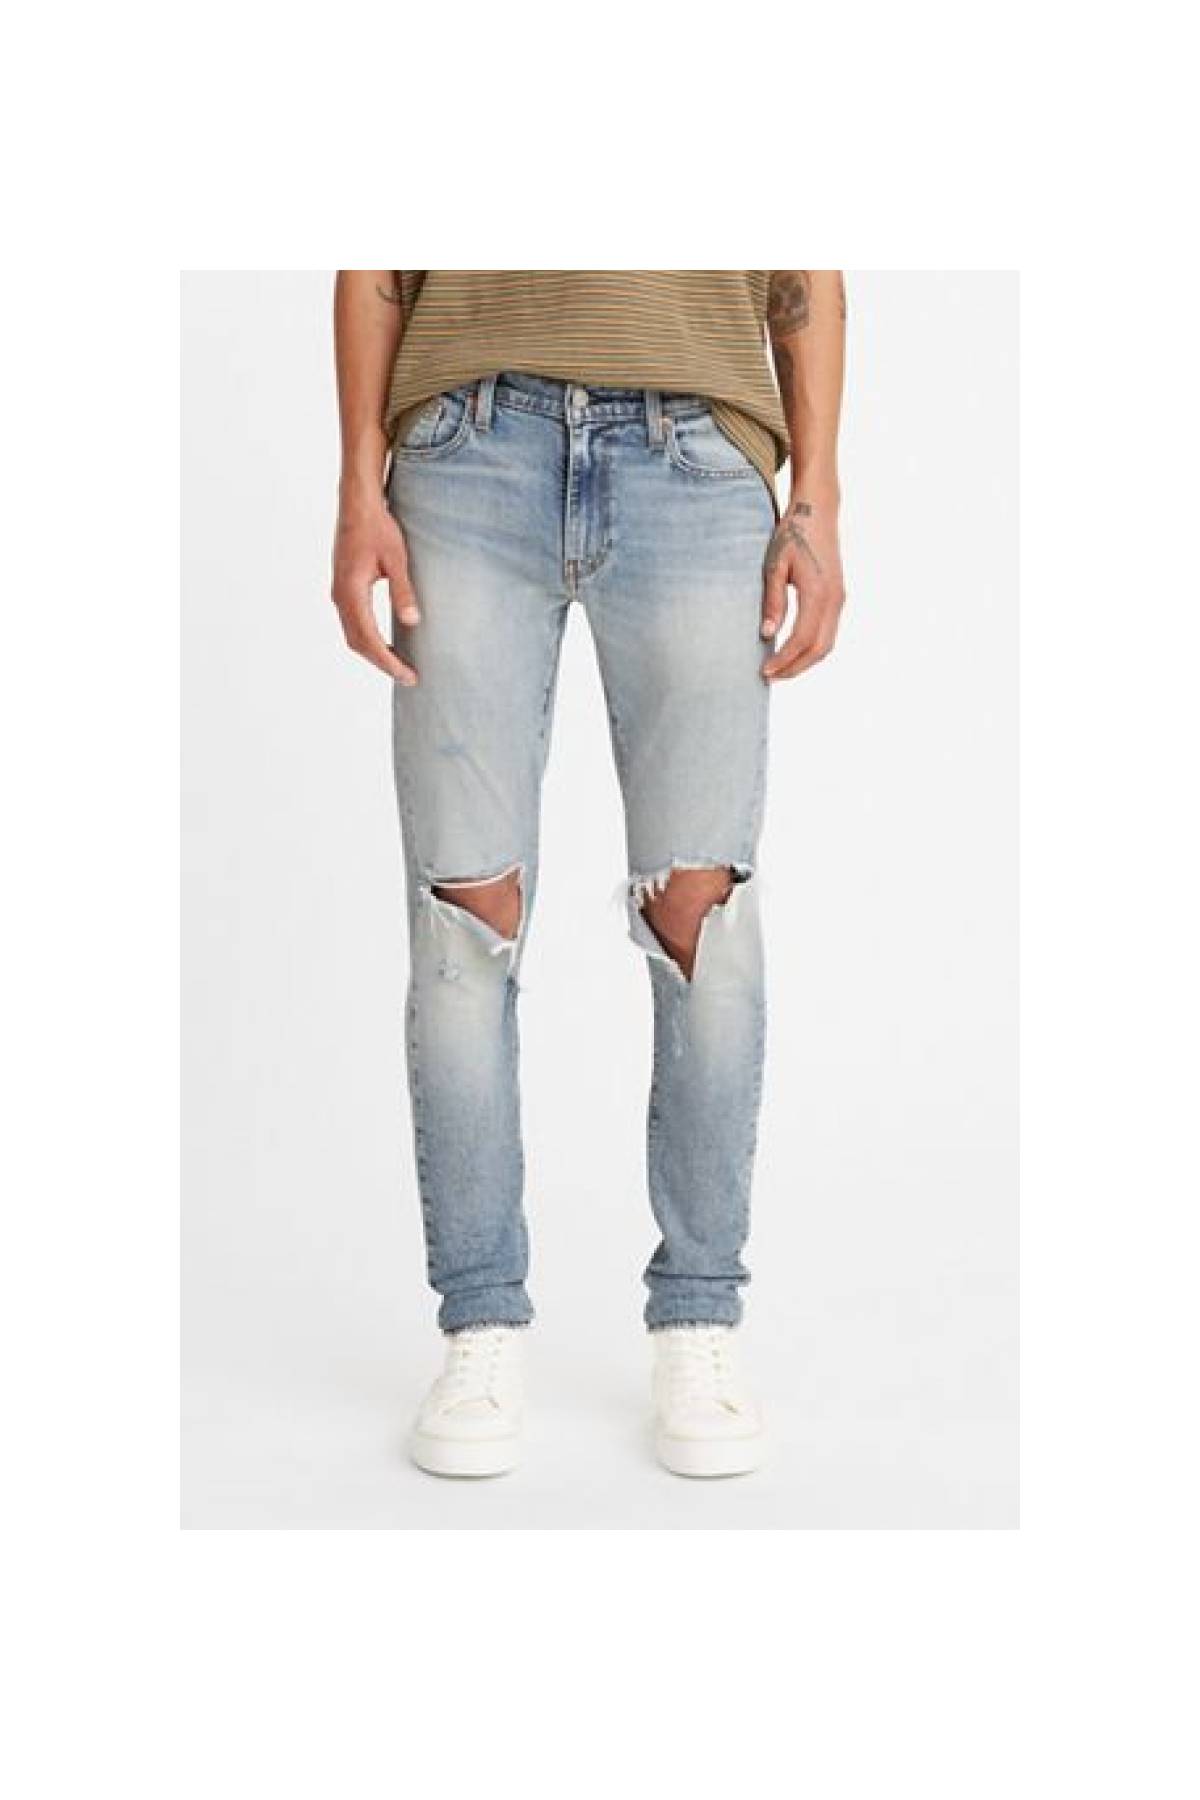 Men's Jeans Fit Guide - Types of Jean Fits & Styles for Men | Levi's® CA